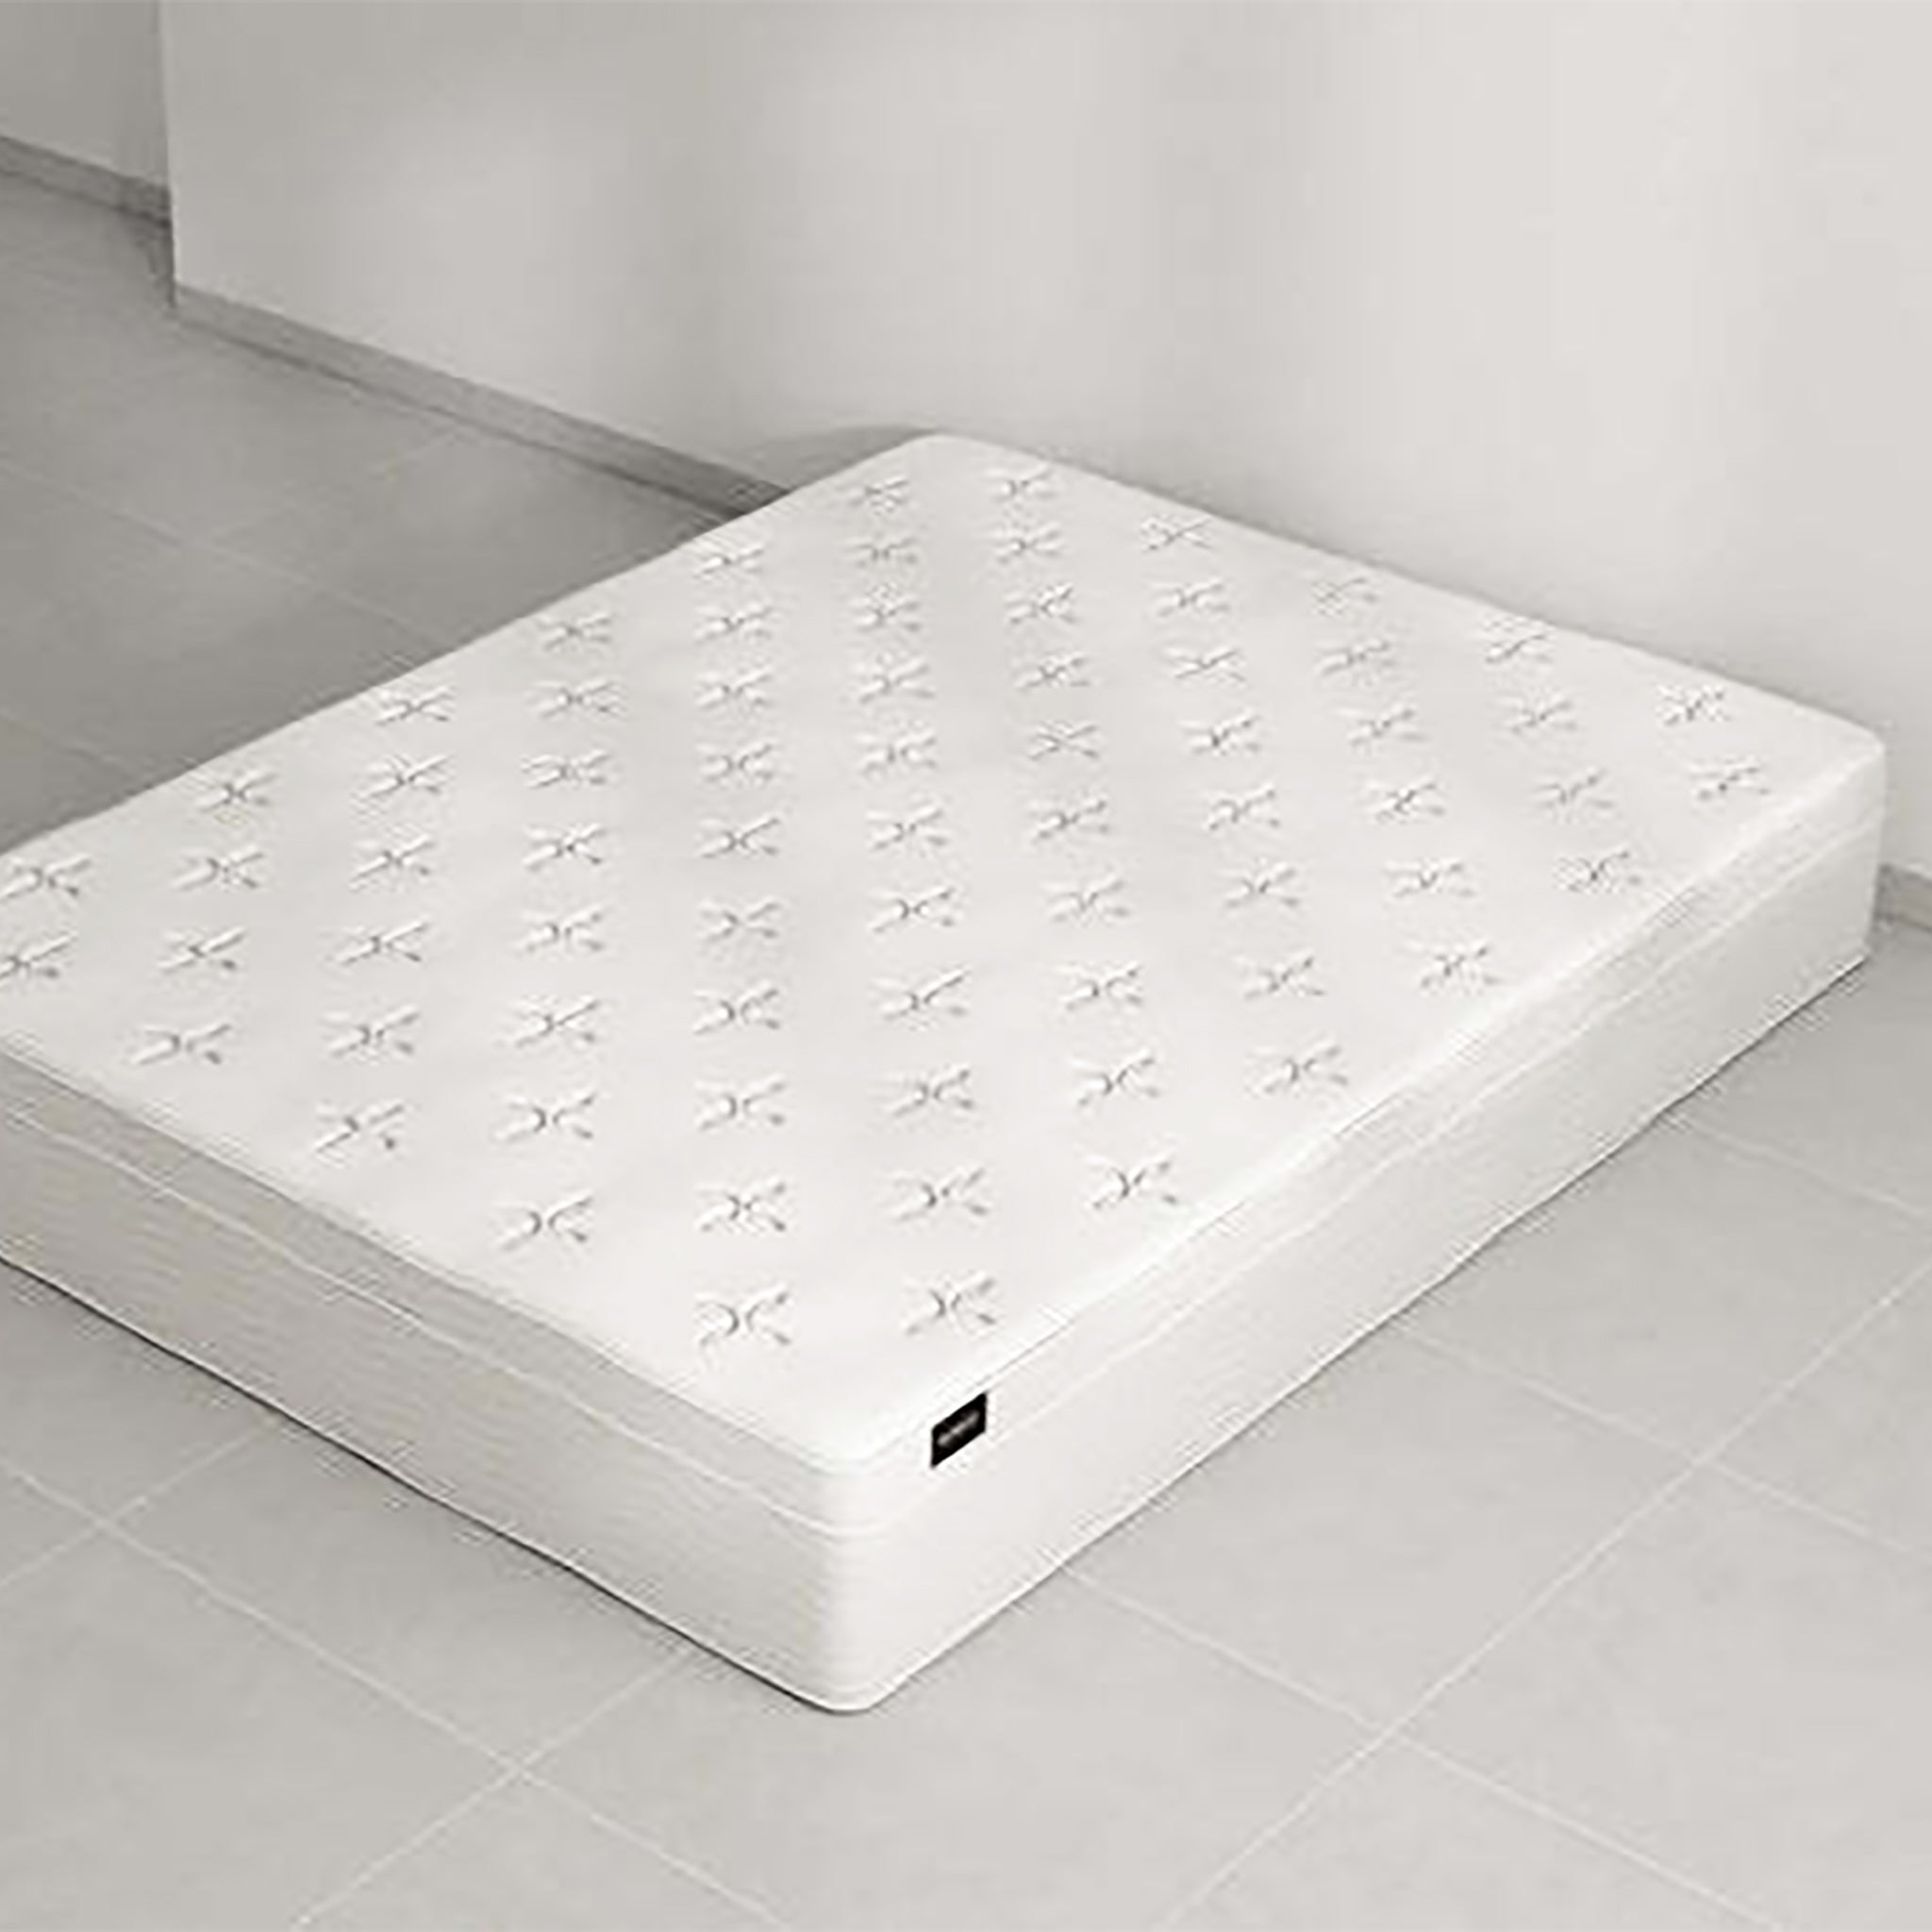 Plush, white EuroTop mattress with a knitted top sits on a tiled floor. The Douglas EuroTop Mattress offers 30cm of comfort and support.